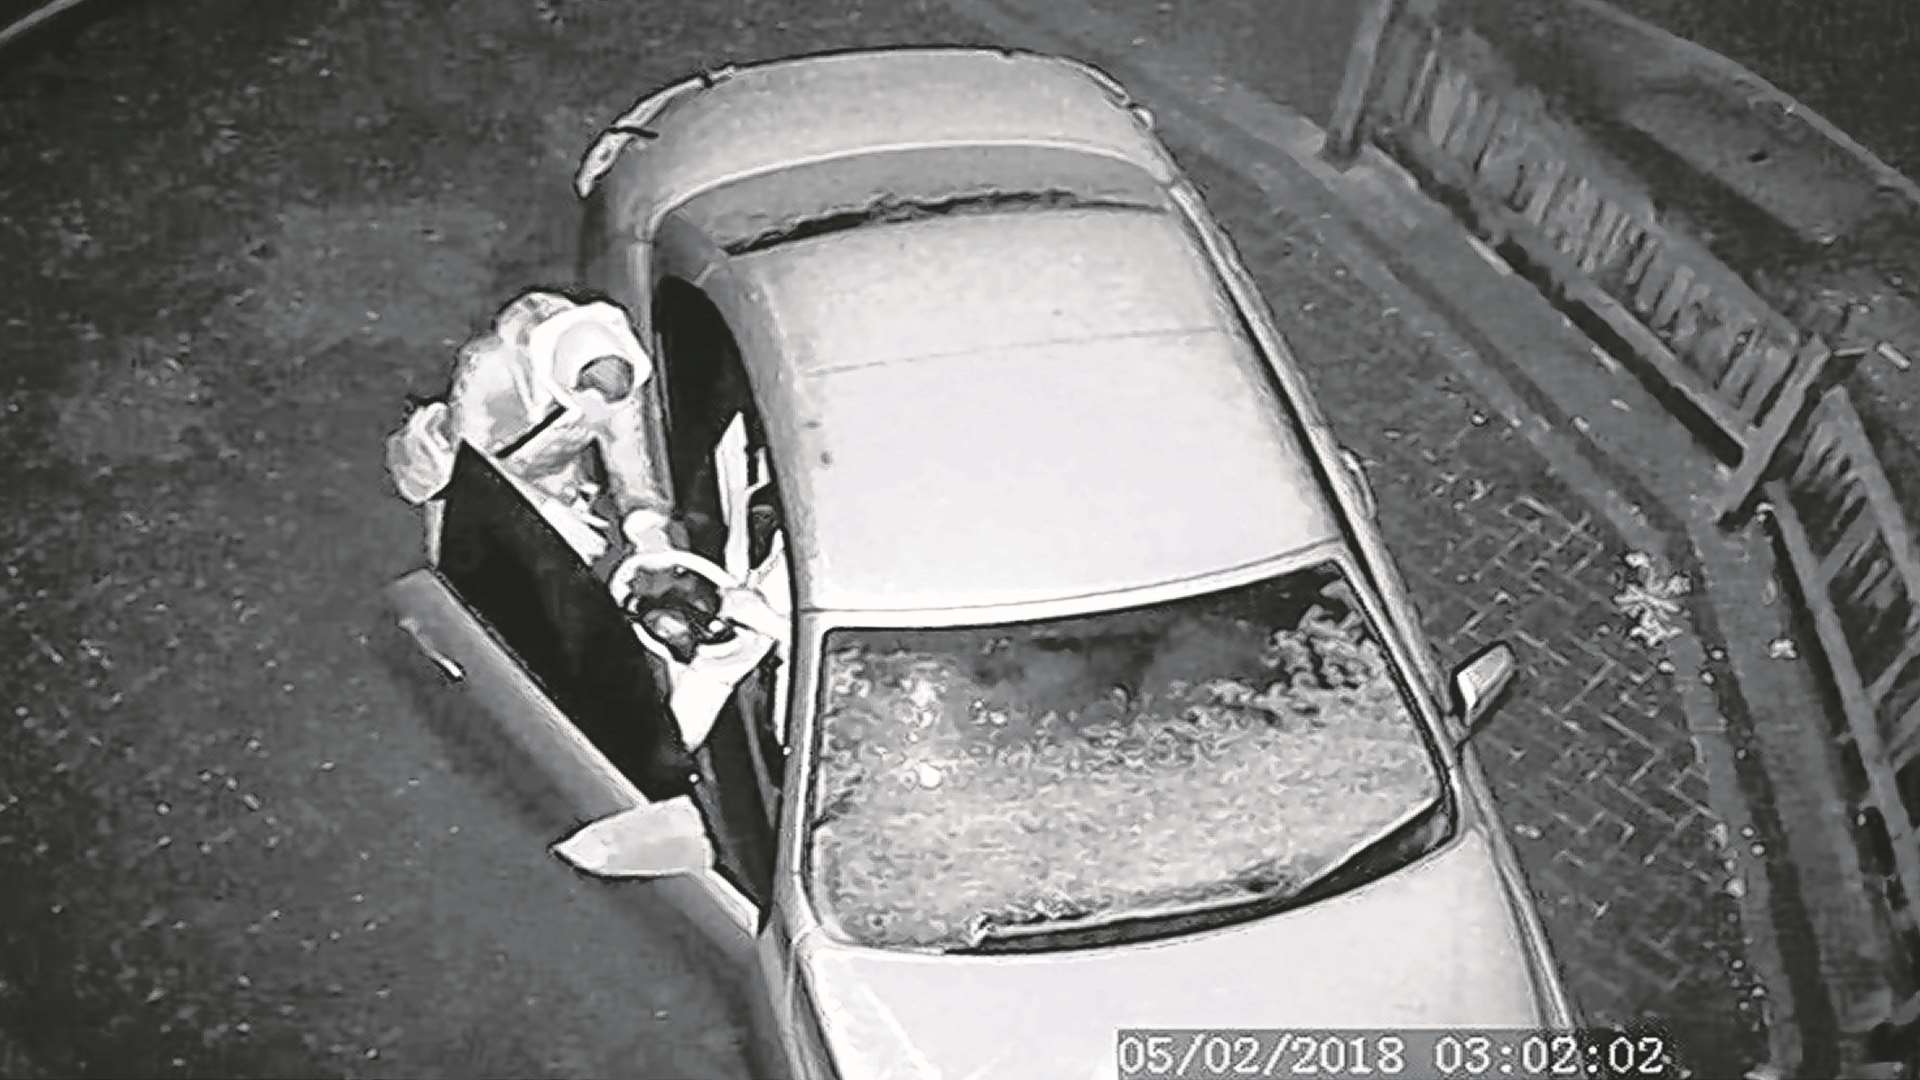 The thief can be seen handing over the steering wheel and other items from inside the car.